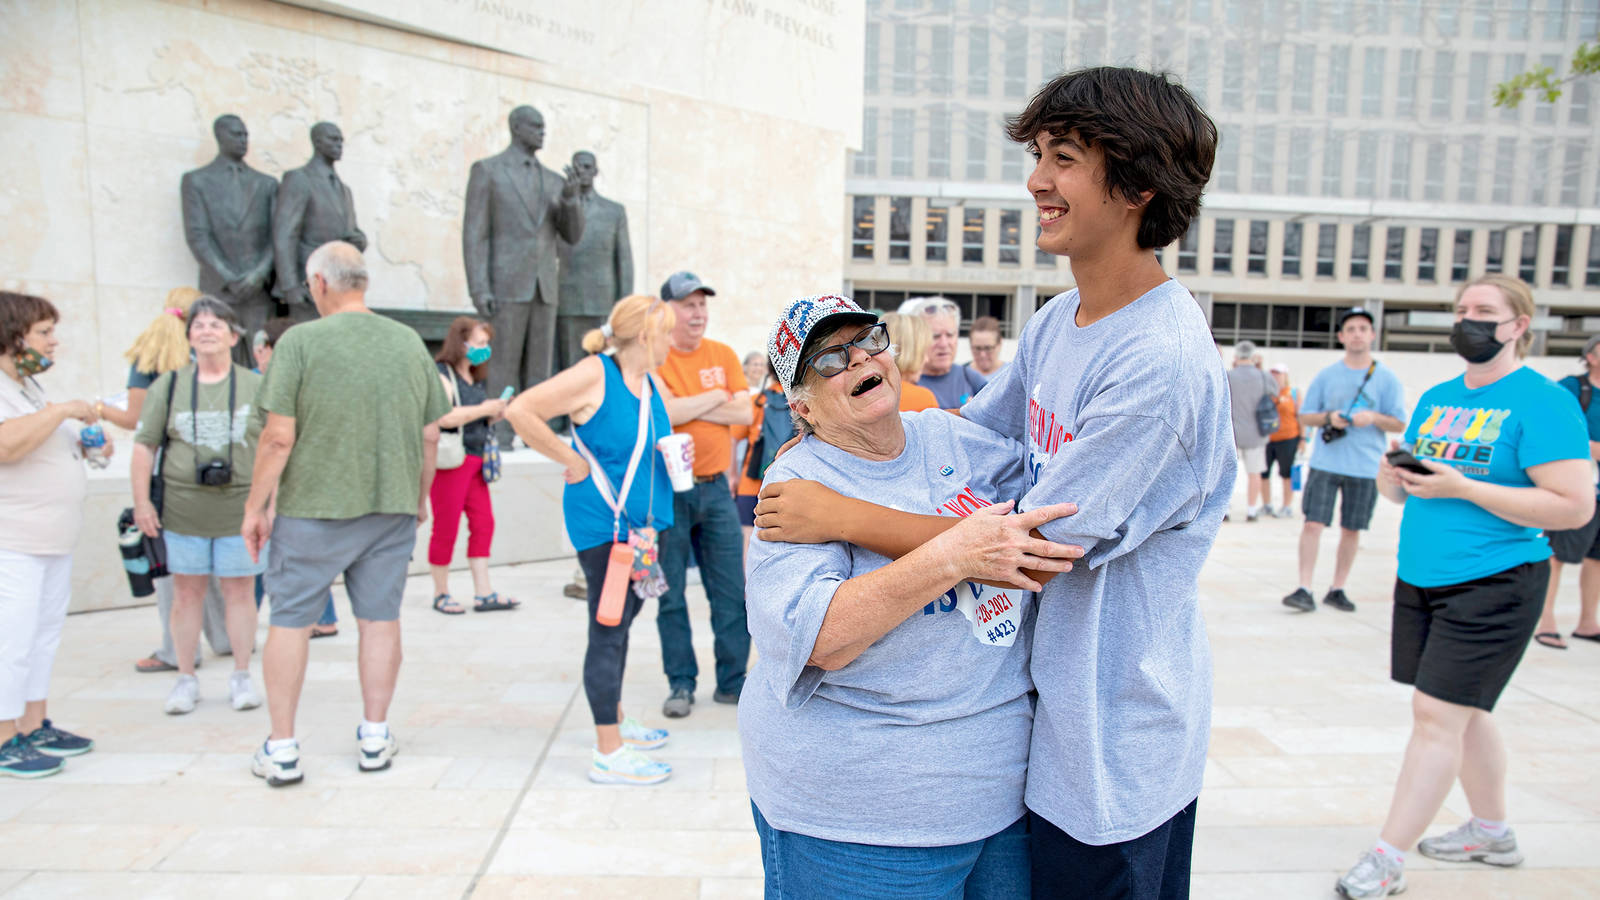 <p>Jennifer Baxter celebrates visiting her 423rd park (and securing the associated stamps) with her 15-year-old grandson, Cameron Emerson, at the Dwight D. Eisenhower Memorial in Washington, D.C. Over the years, Baxter has taken Cameron and his sister Rachel on many of her park adventures. </p>